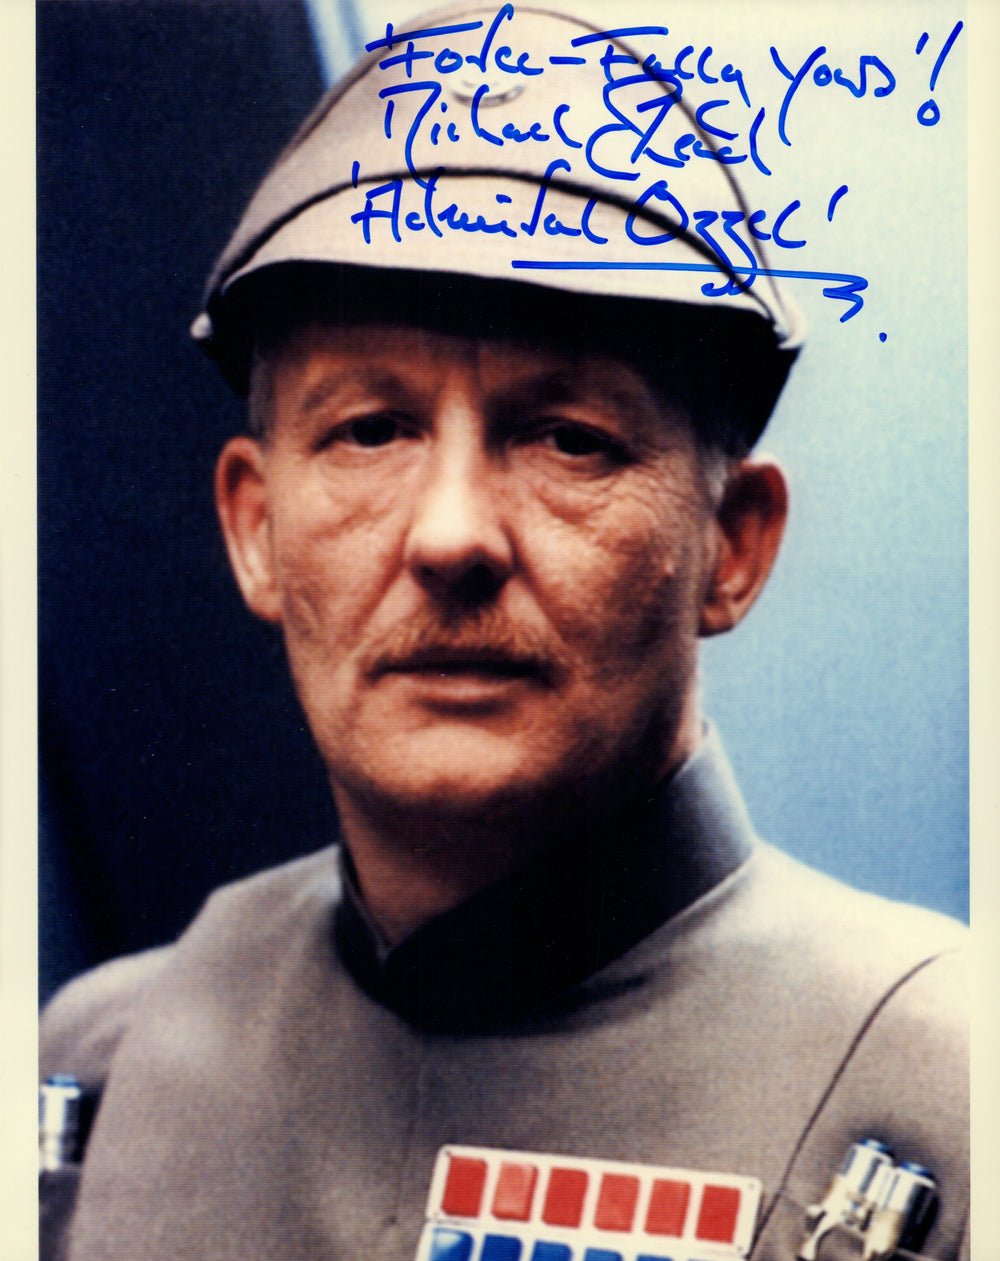 Michael Sheard as Admiral Ozzel in Star Wars: The Empire Strikes Back Signed 8x10 Photo